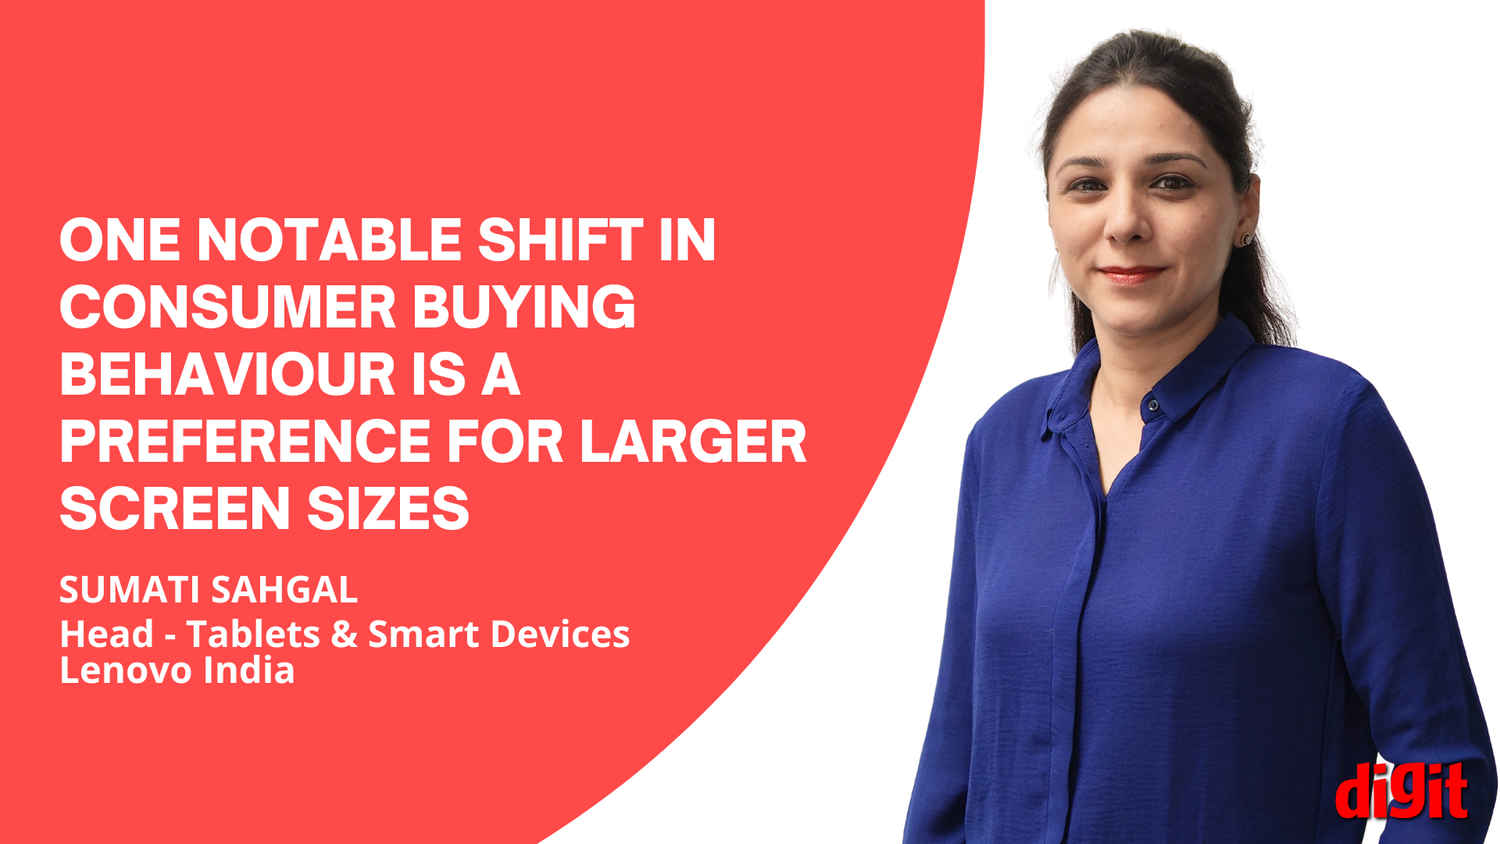 Lenovo’s Sumati Sahgal tells us about evolving consumer trends in the tablet space and tablets’ relevance in the age of foldables